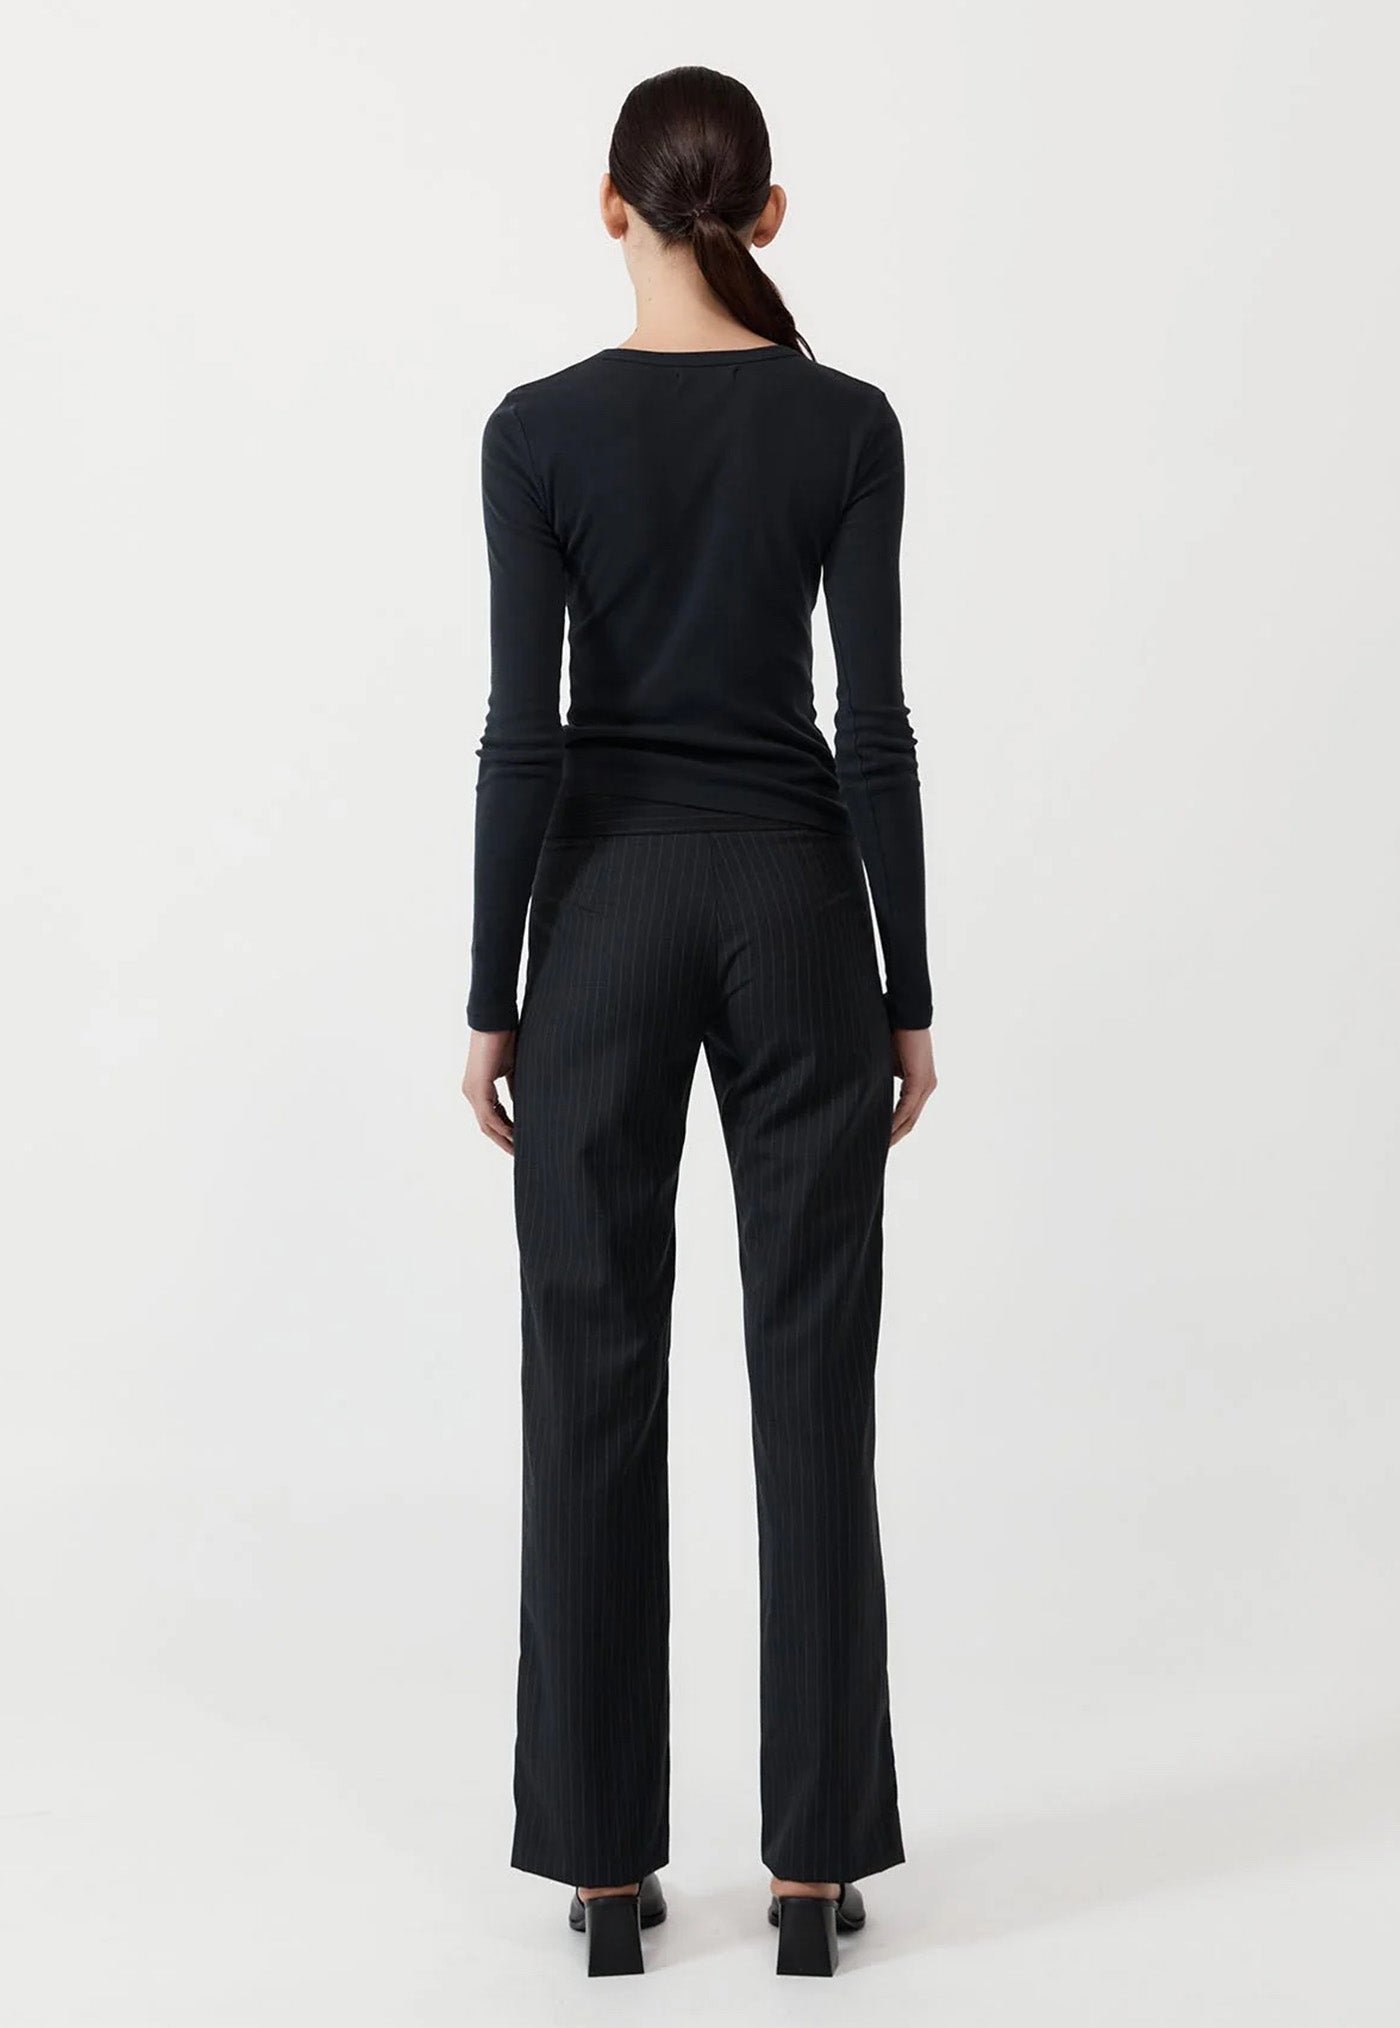 Deconstructed Pinstripe Trousers - Black sold by Angel Divine